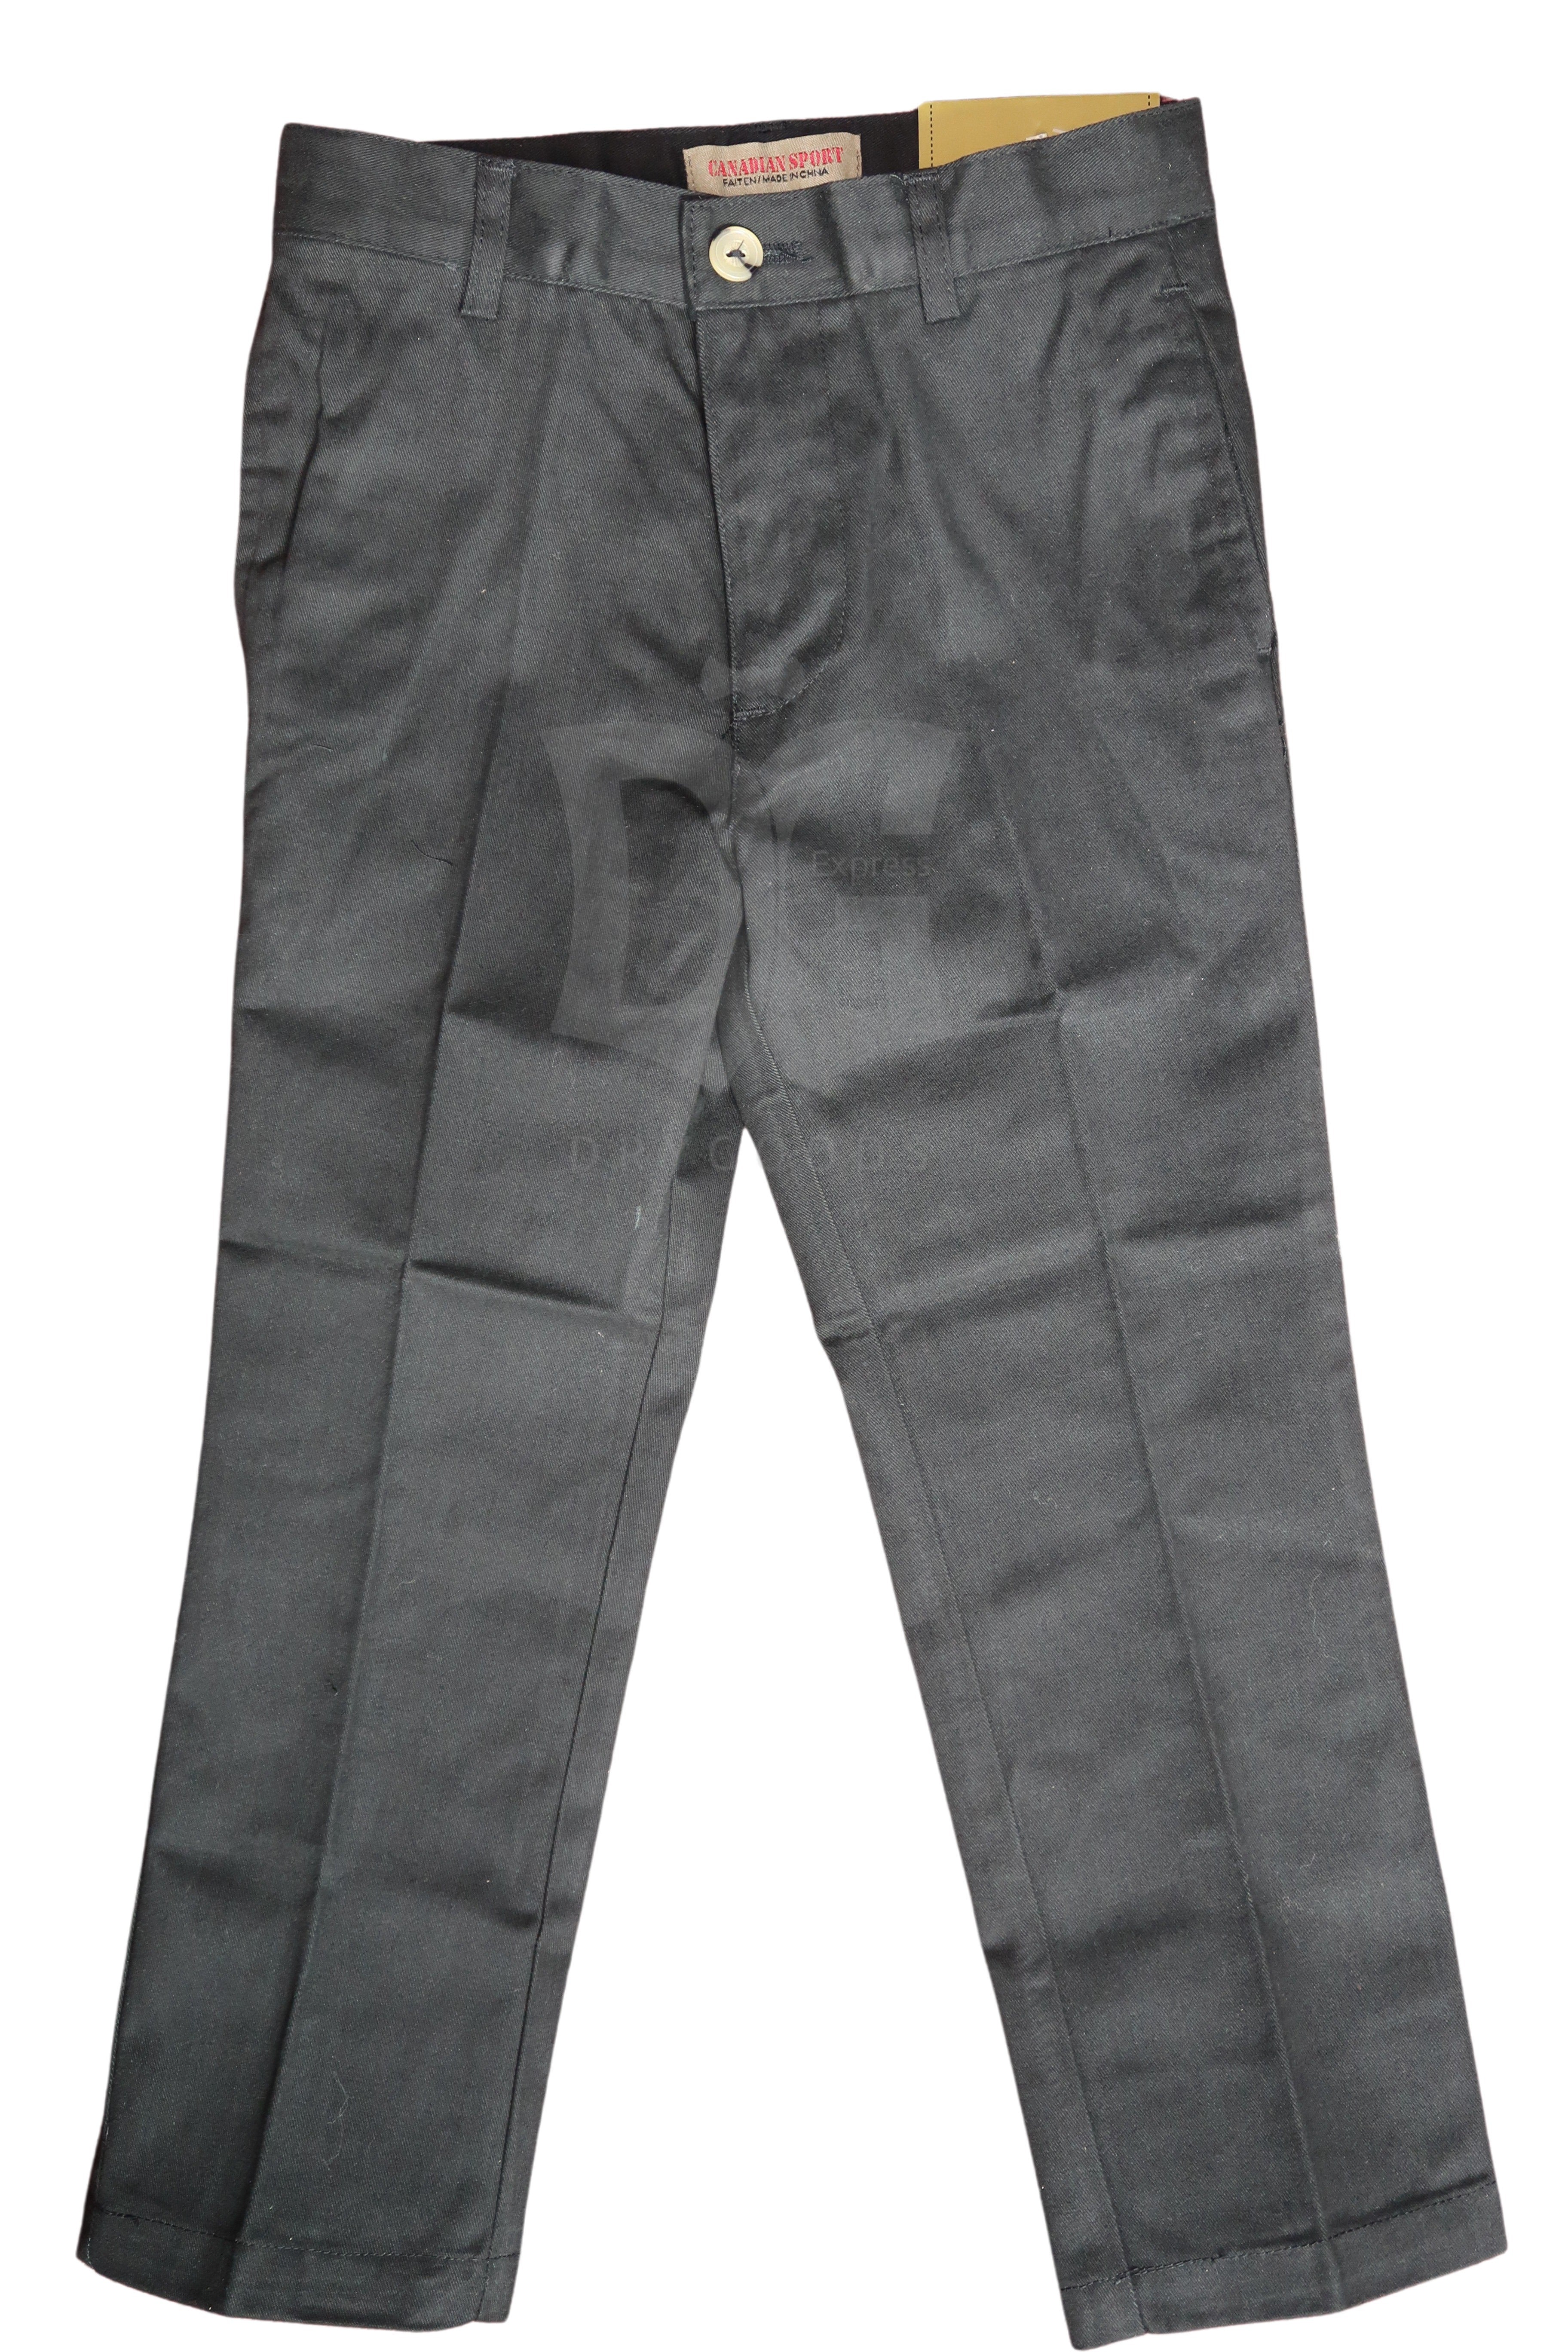 Canadian Polo Boys Weekday Pants Slim Fit